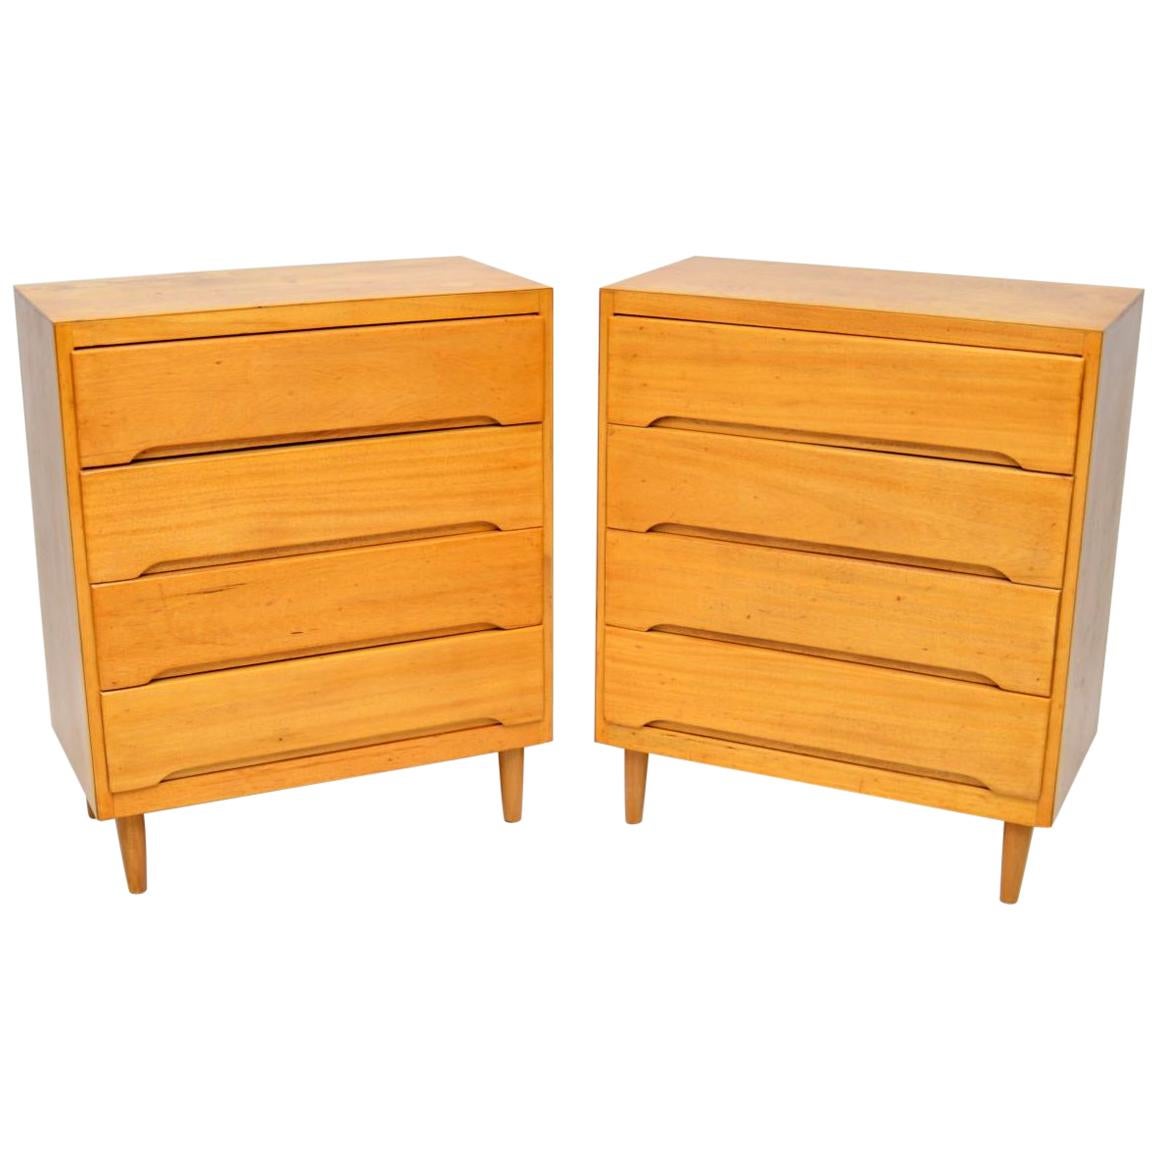 1960s Pair of Satin Wood Chest of Drawers